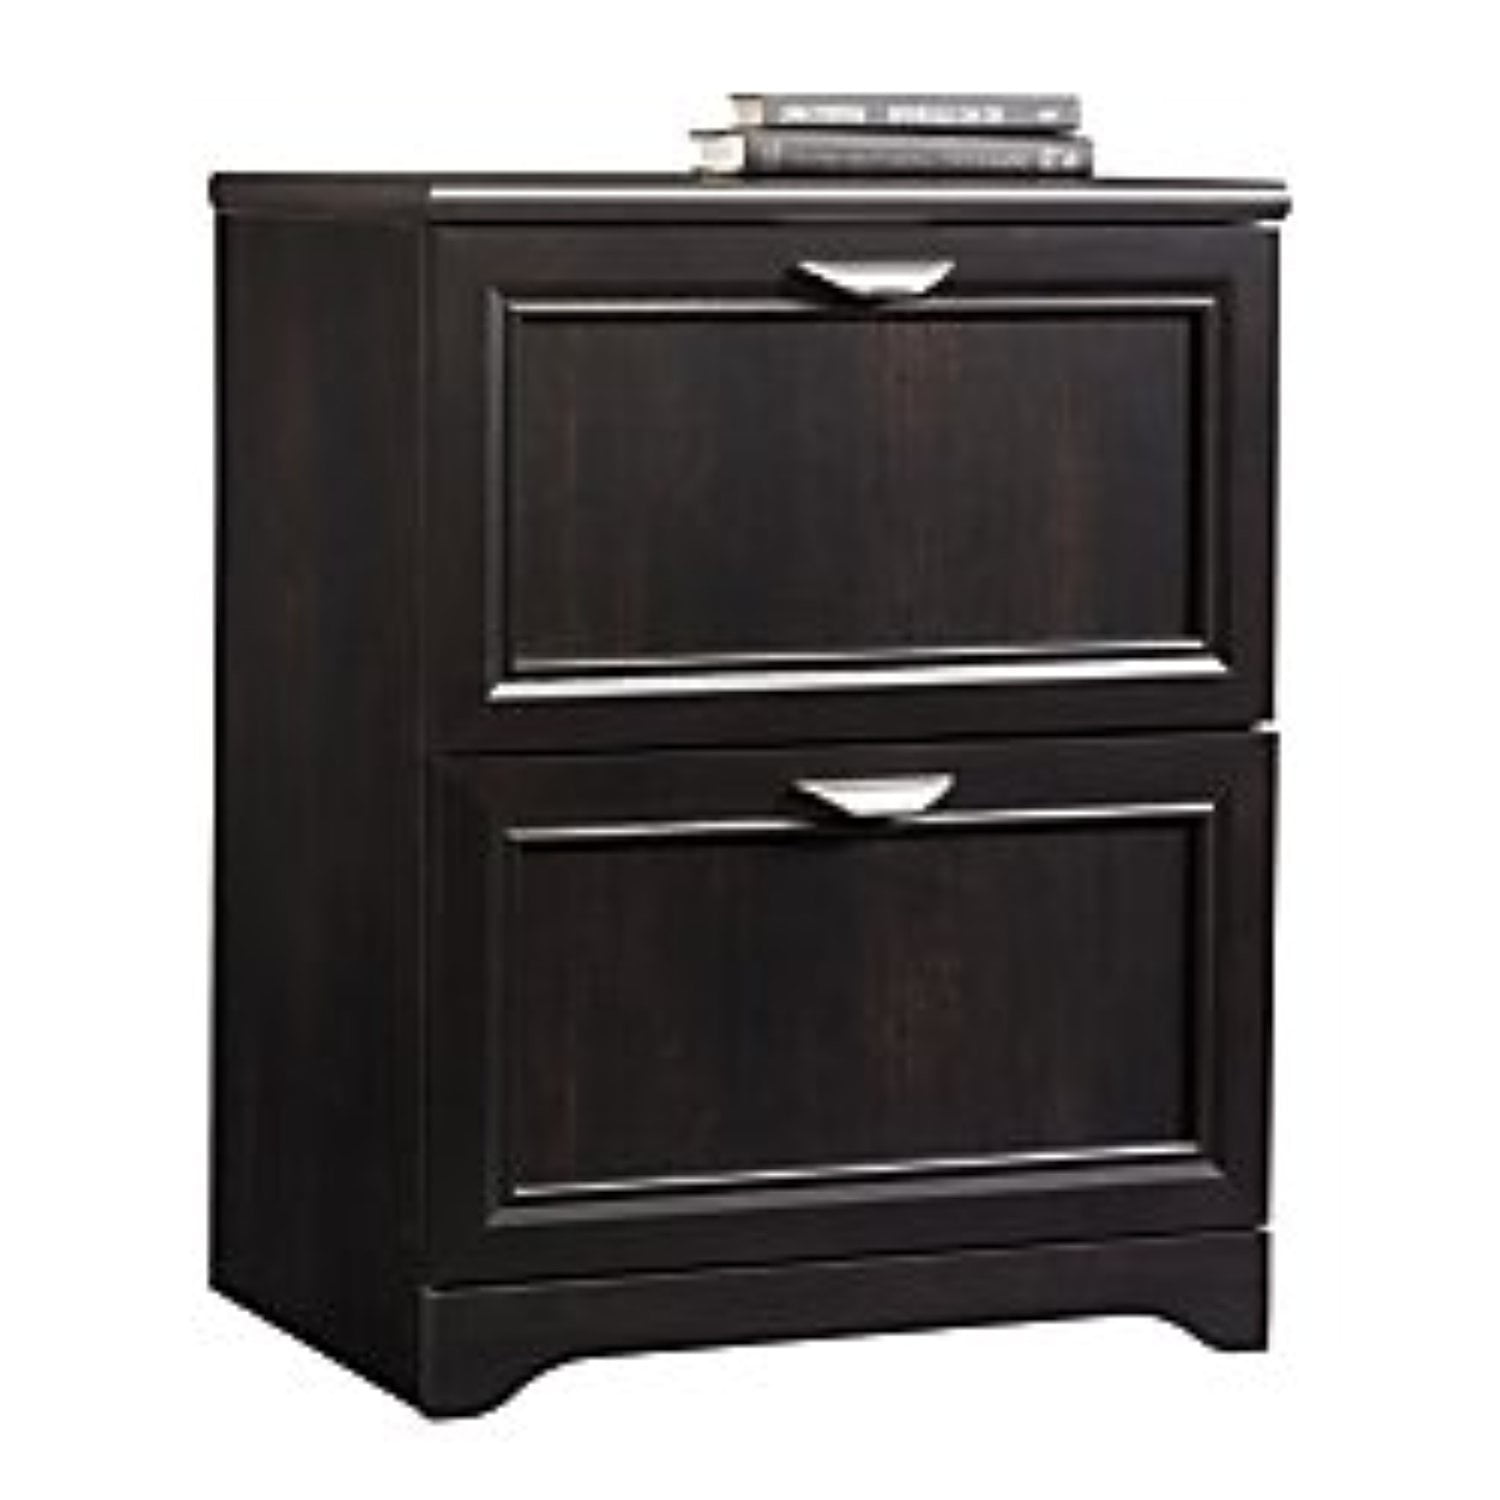 realspace(r) magellan collection 2drawer lateral file